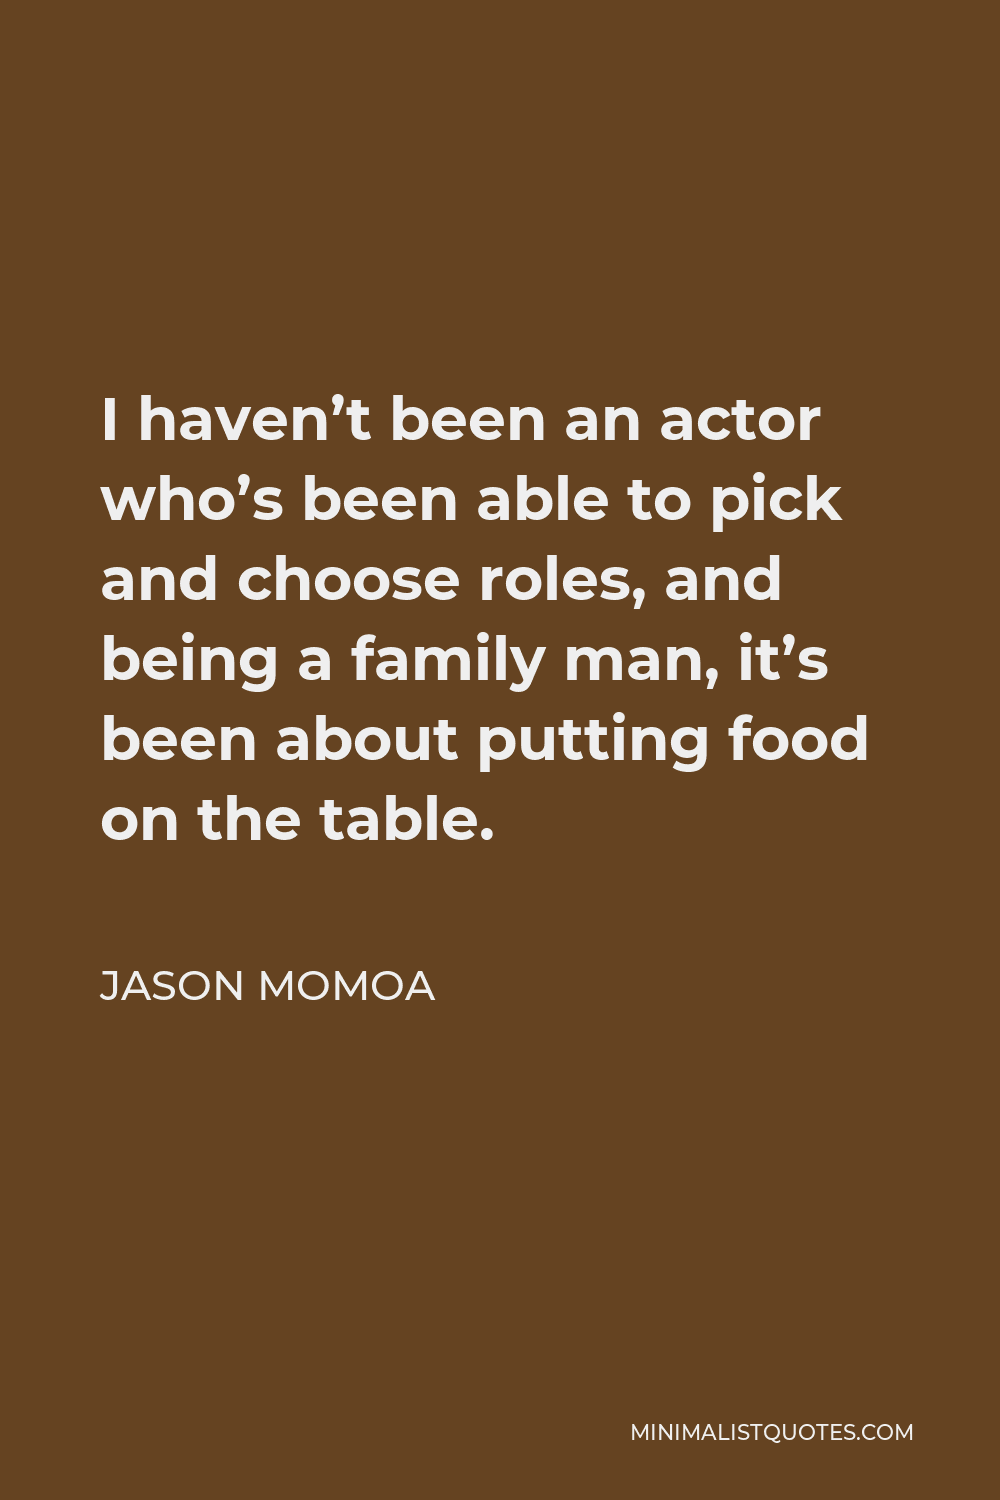 Jason Momoa Quote - I haven’t been an actor who’s been able to pick and choose roles, and being a family man, it’s been about putting food on the table.